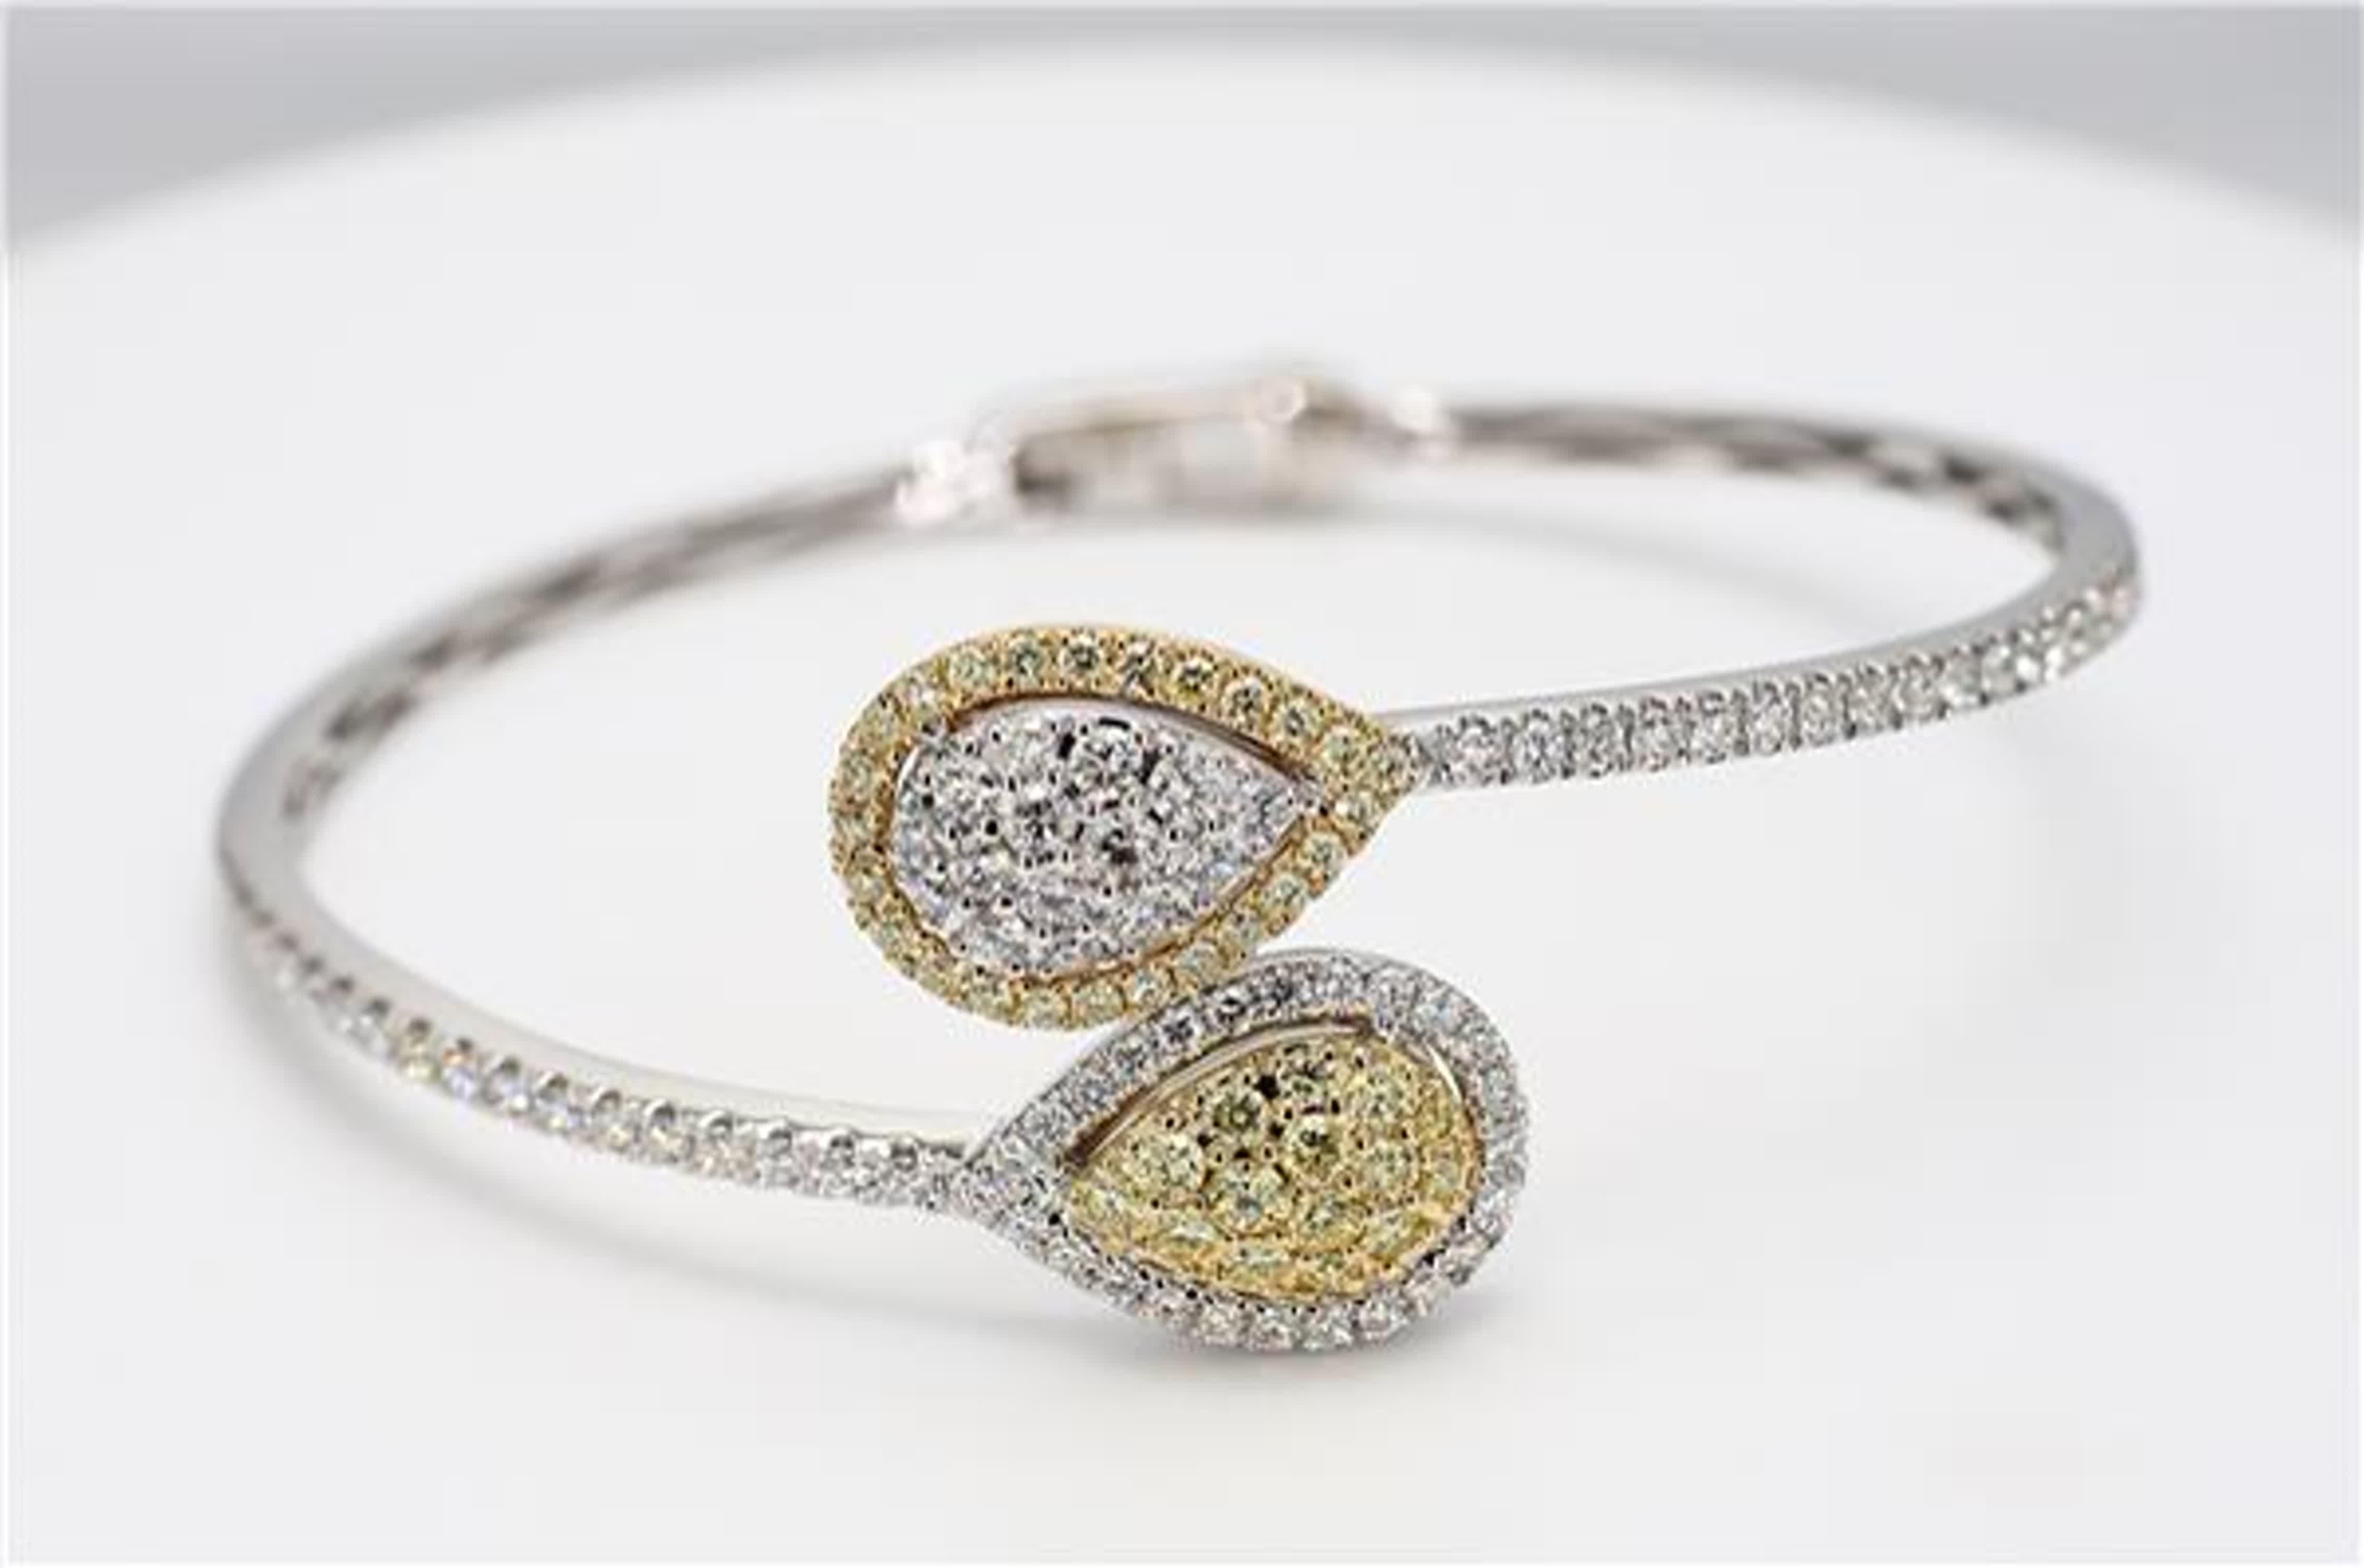 RareGemWorld's classic diamond bracelet. Mounted in a beautiful 18K Yellow and White Gold setting with natural round cut yellow diamonds. The yellow diamonds are complimented by small round natural white diamond melee. This bracelet is guaranteed to